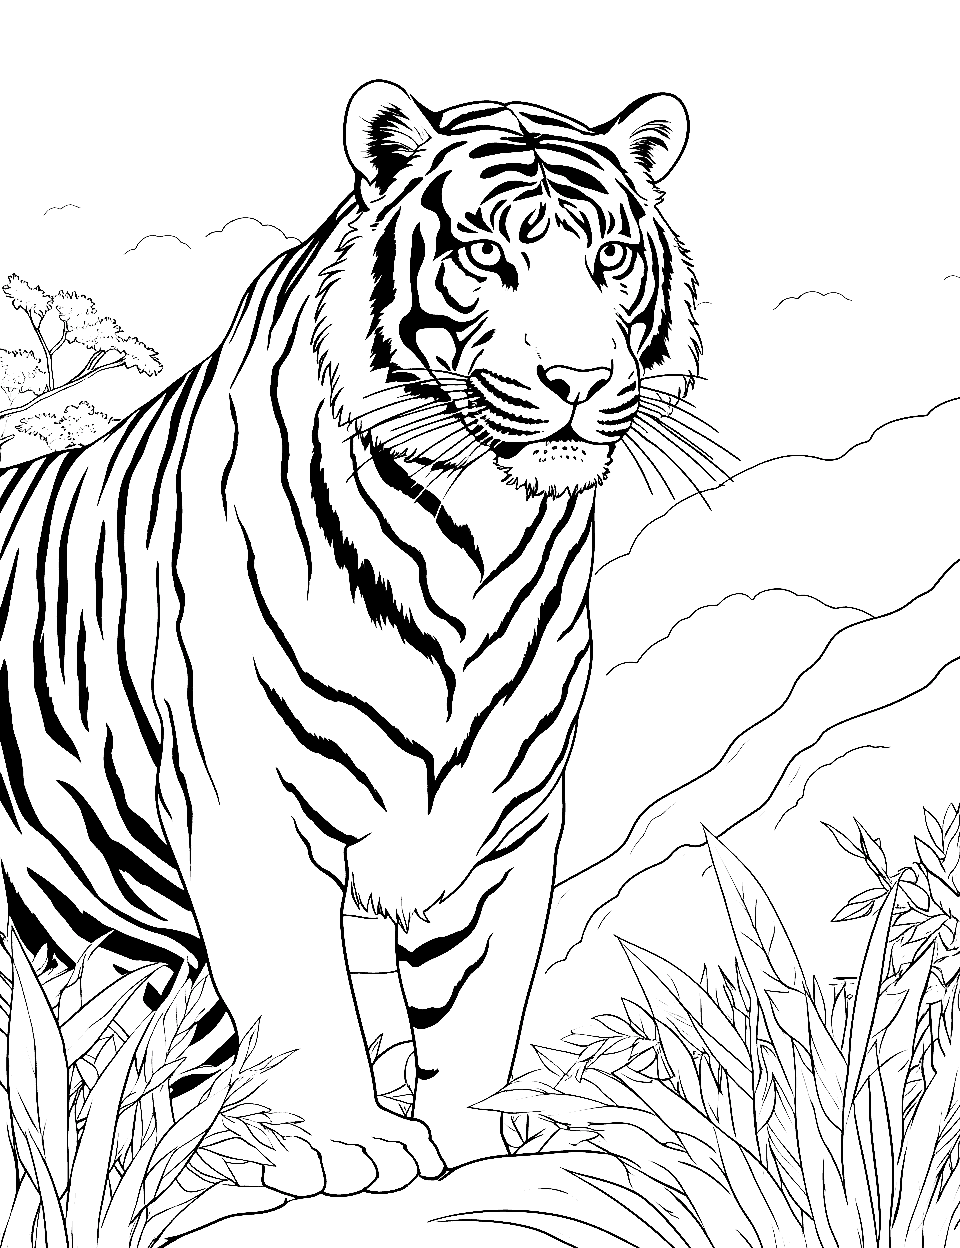 Jungle Guardian Tiger Coloring Page - A tiger watching over its jungle territory from a high vantage point.